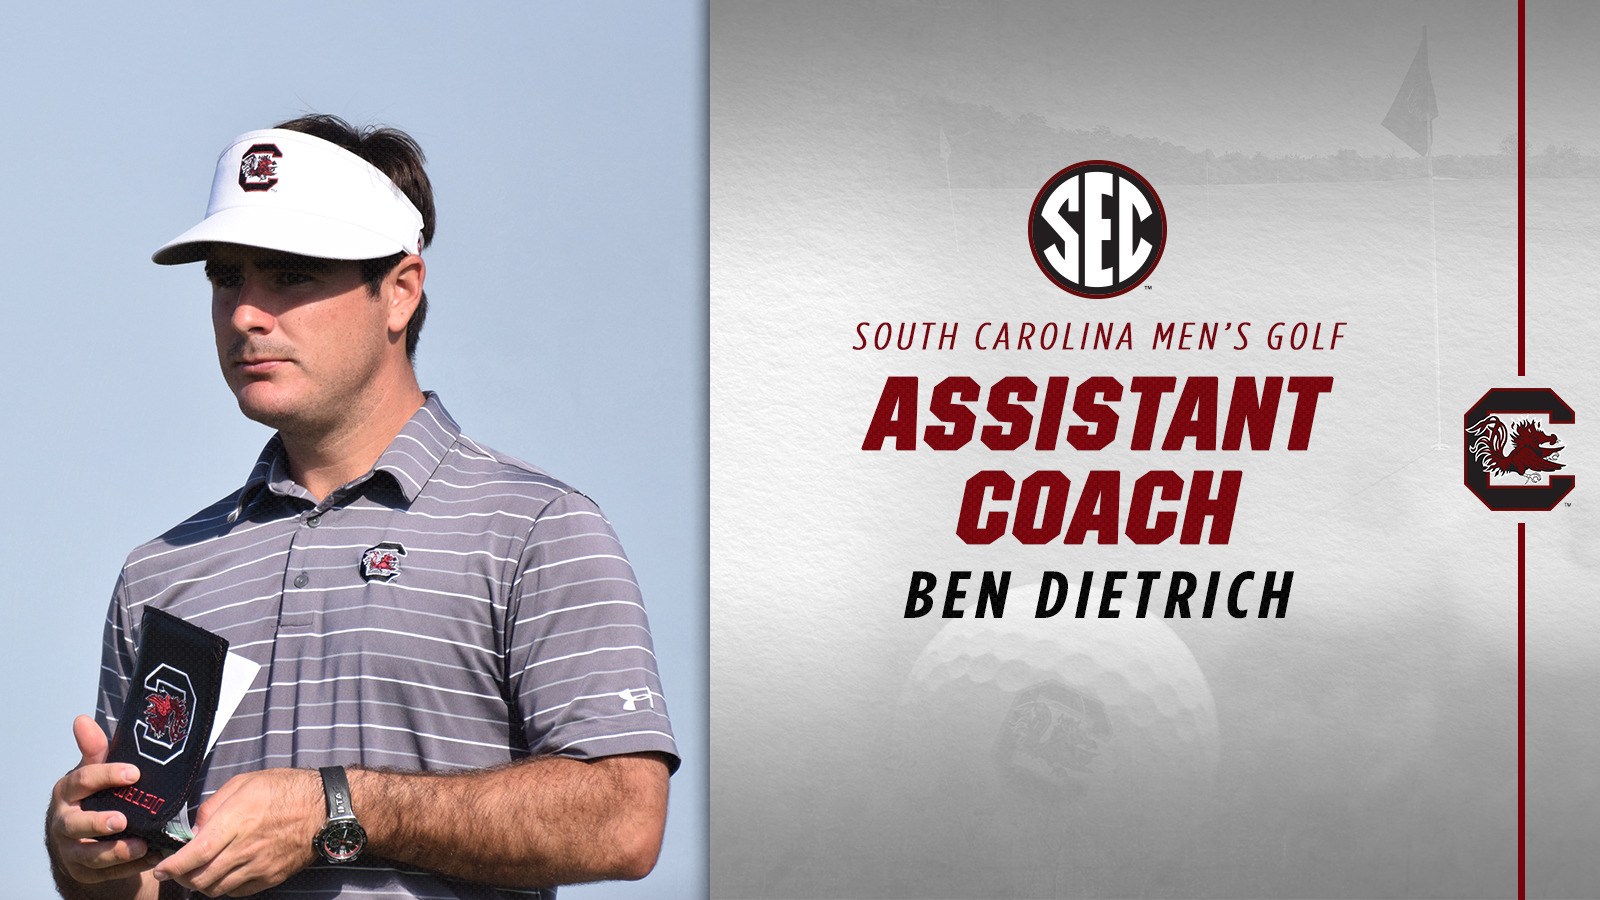 Dietrich tabbed as new assistant coach for men's golf